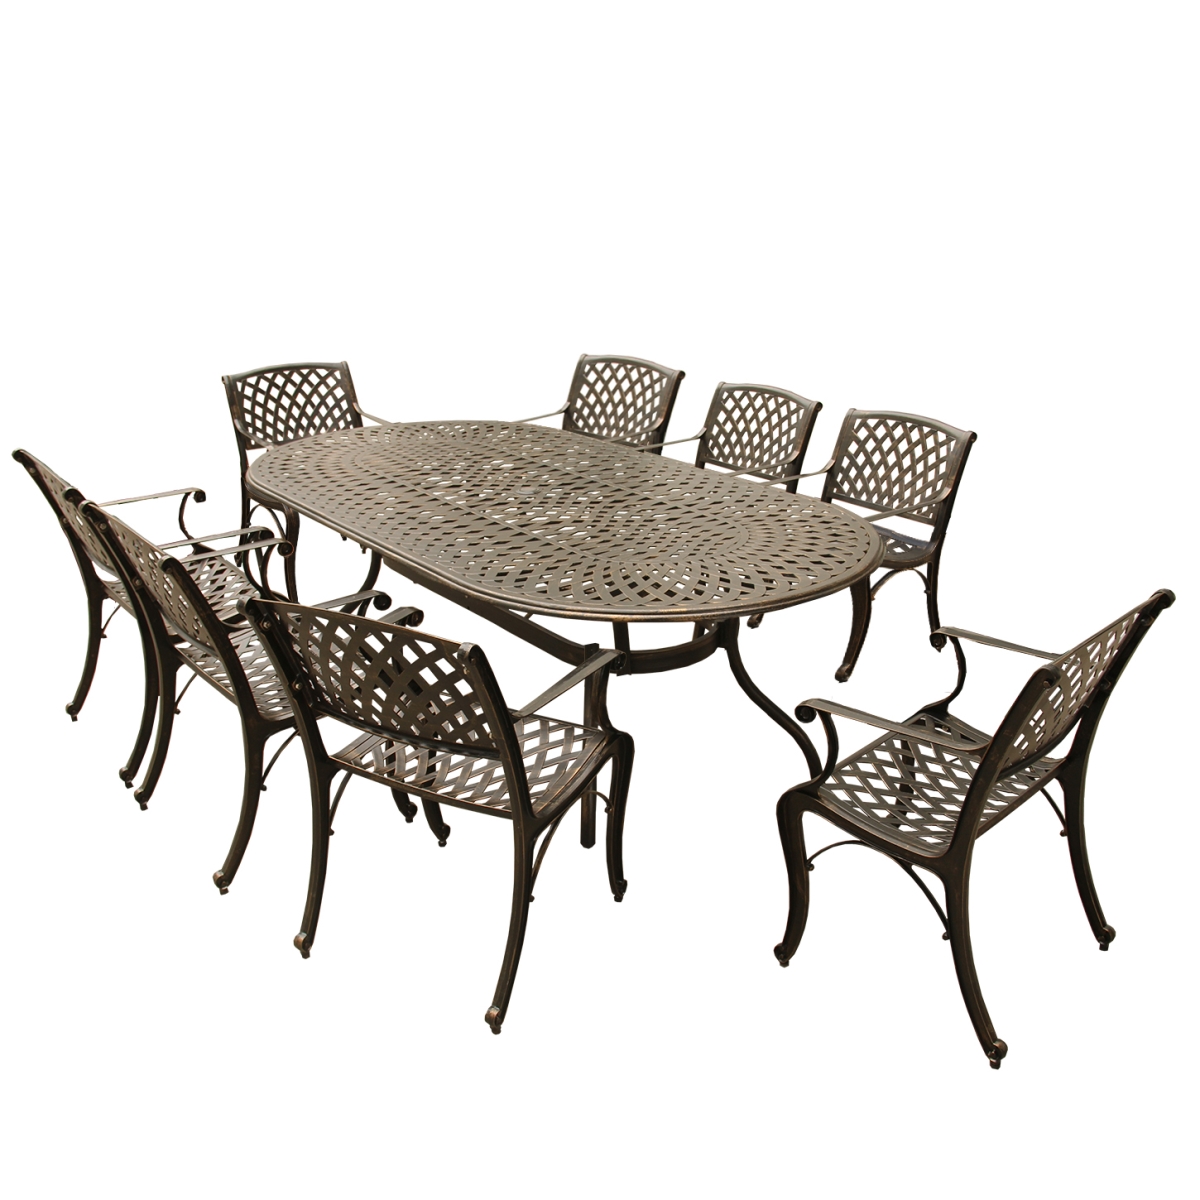 Picture of Oakland Living 1025-1016-8-BZ 95 in. Contemporary Modern Outdoor Mesh Lattice Aluminium Oval Dining Set with Eight Arm Chairs, Bronze